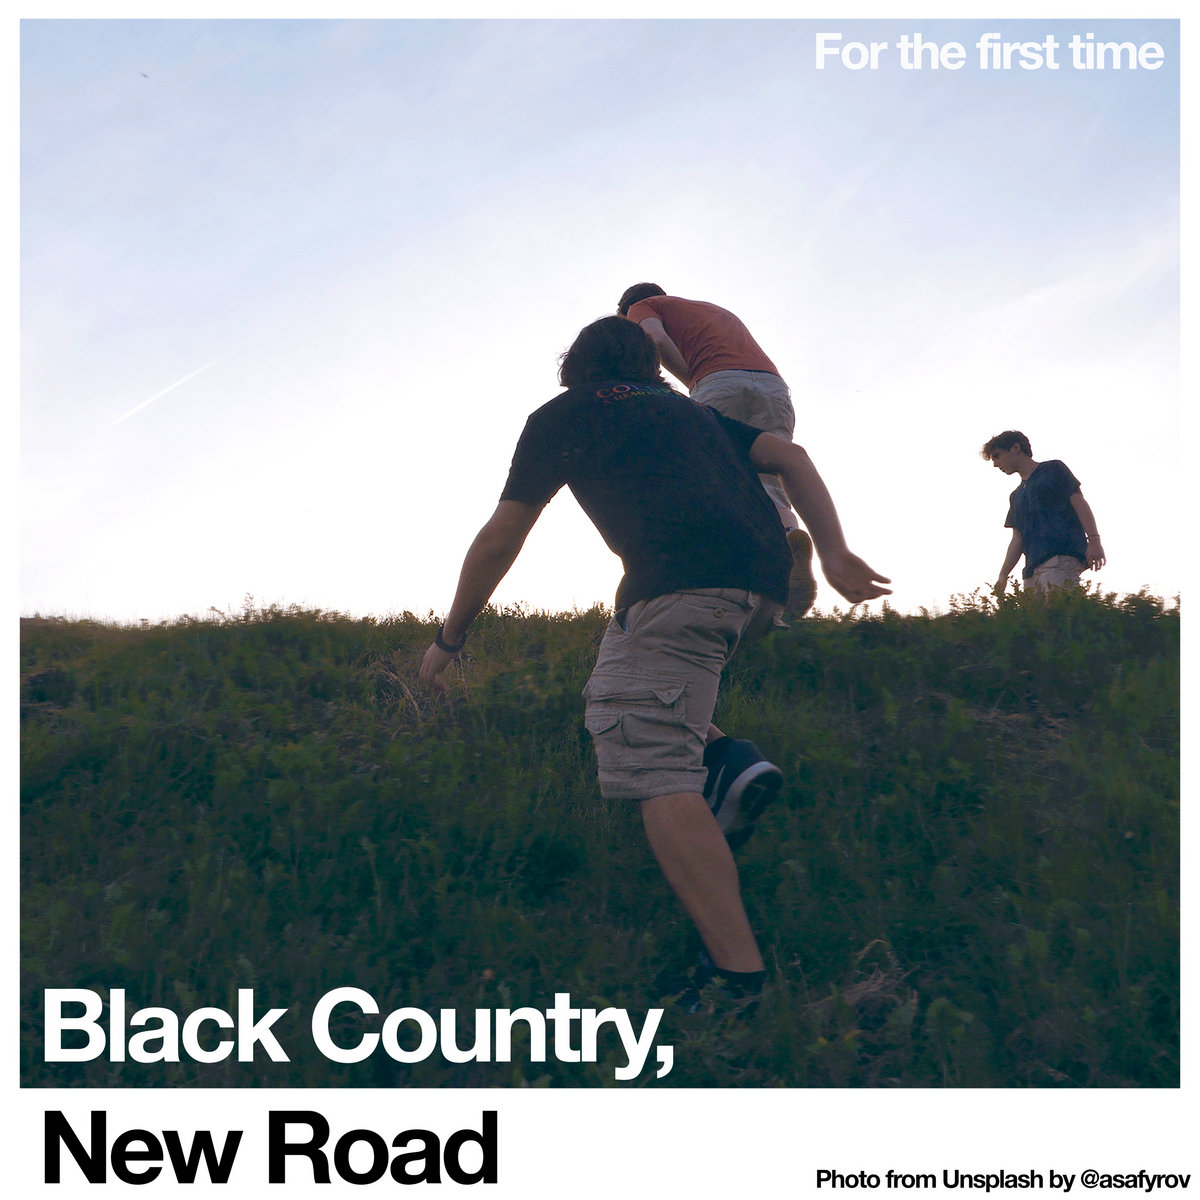 Black Country, New Road For the First Time